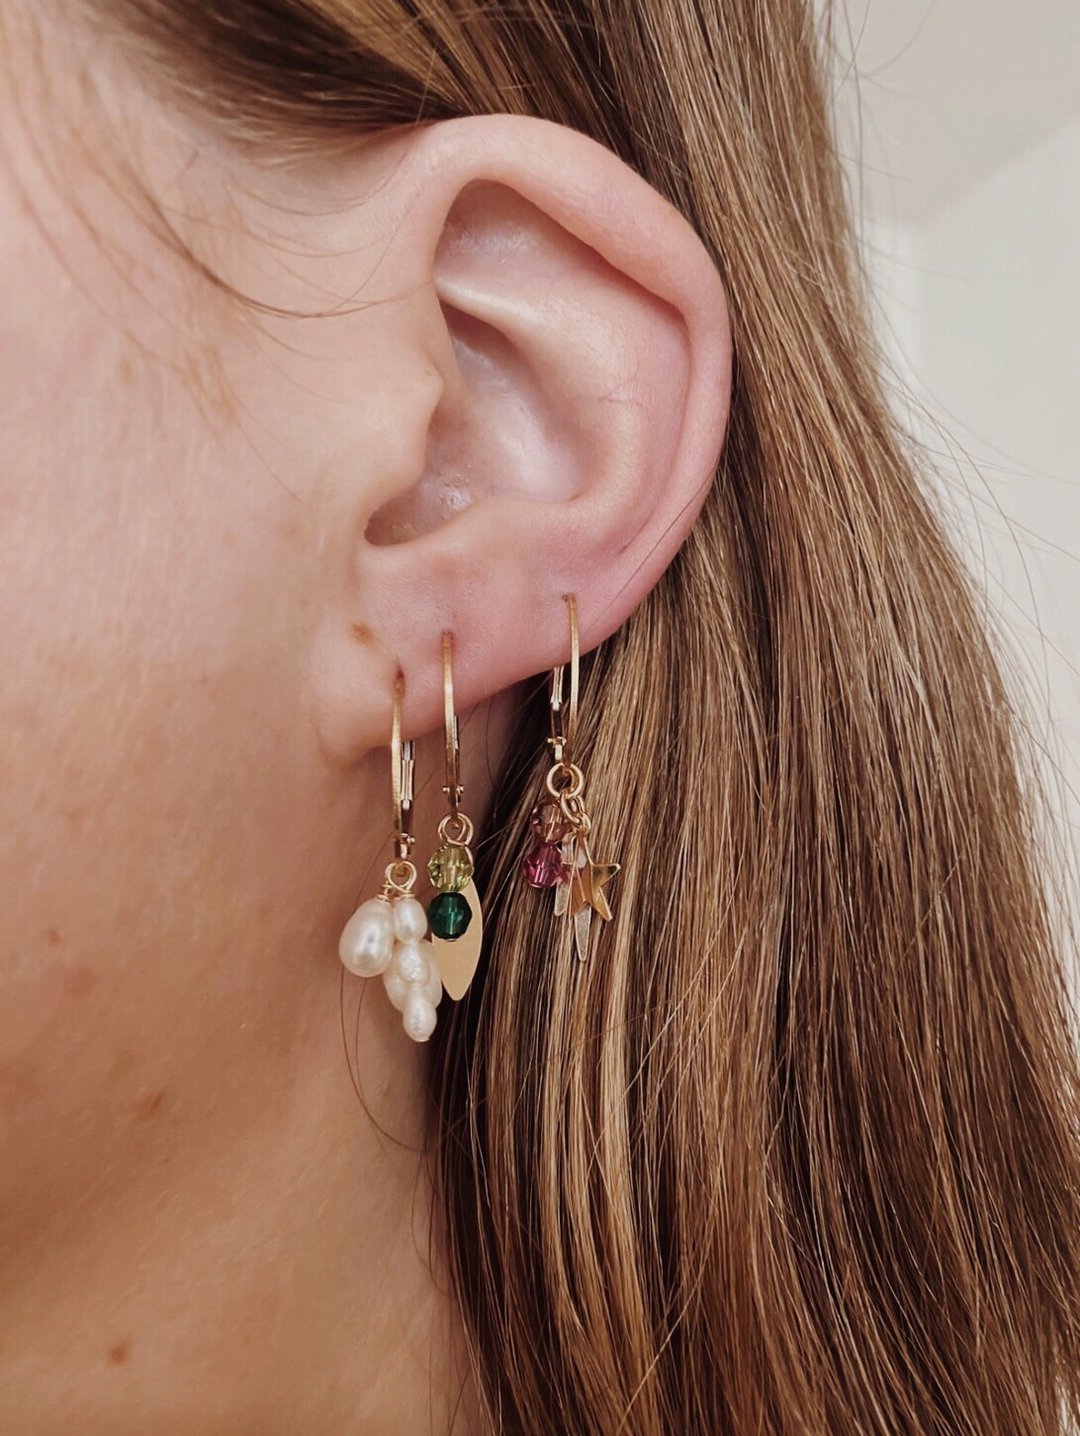 pearl cluster earrings on yellow gold hoops finerrings layered on ear